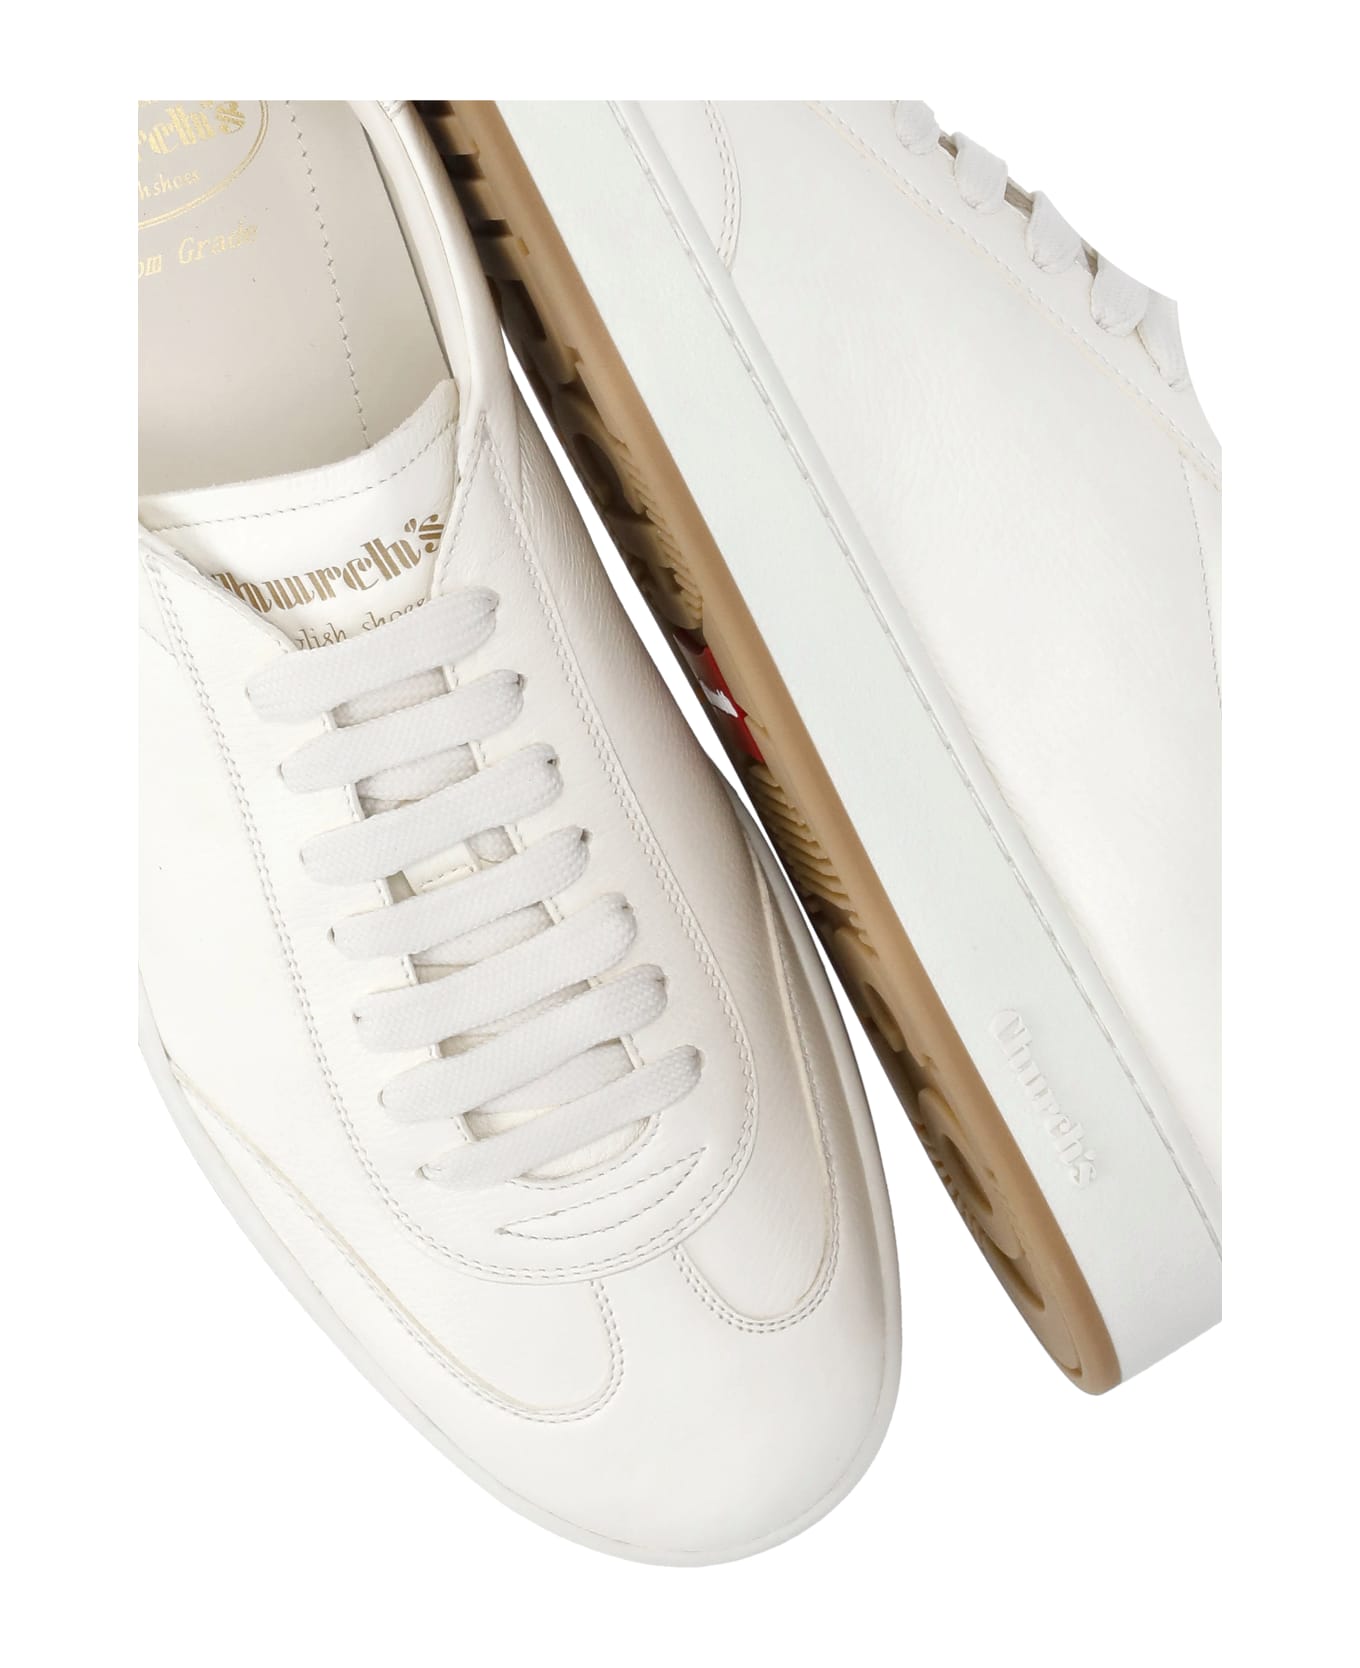 Church's Largs 2 Sneakers - Ivory スニーカー